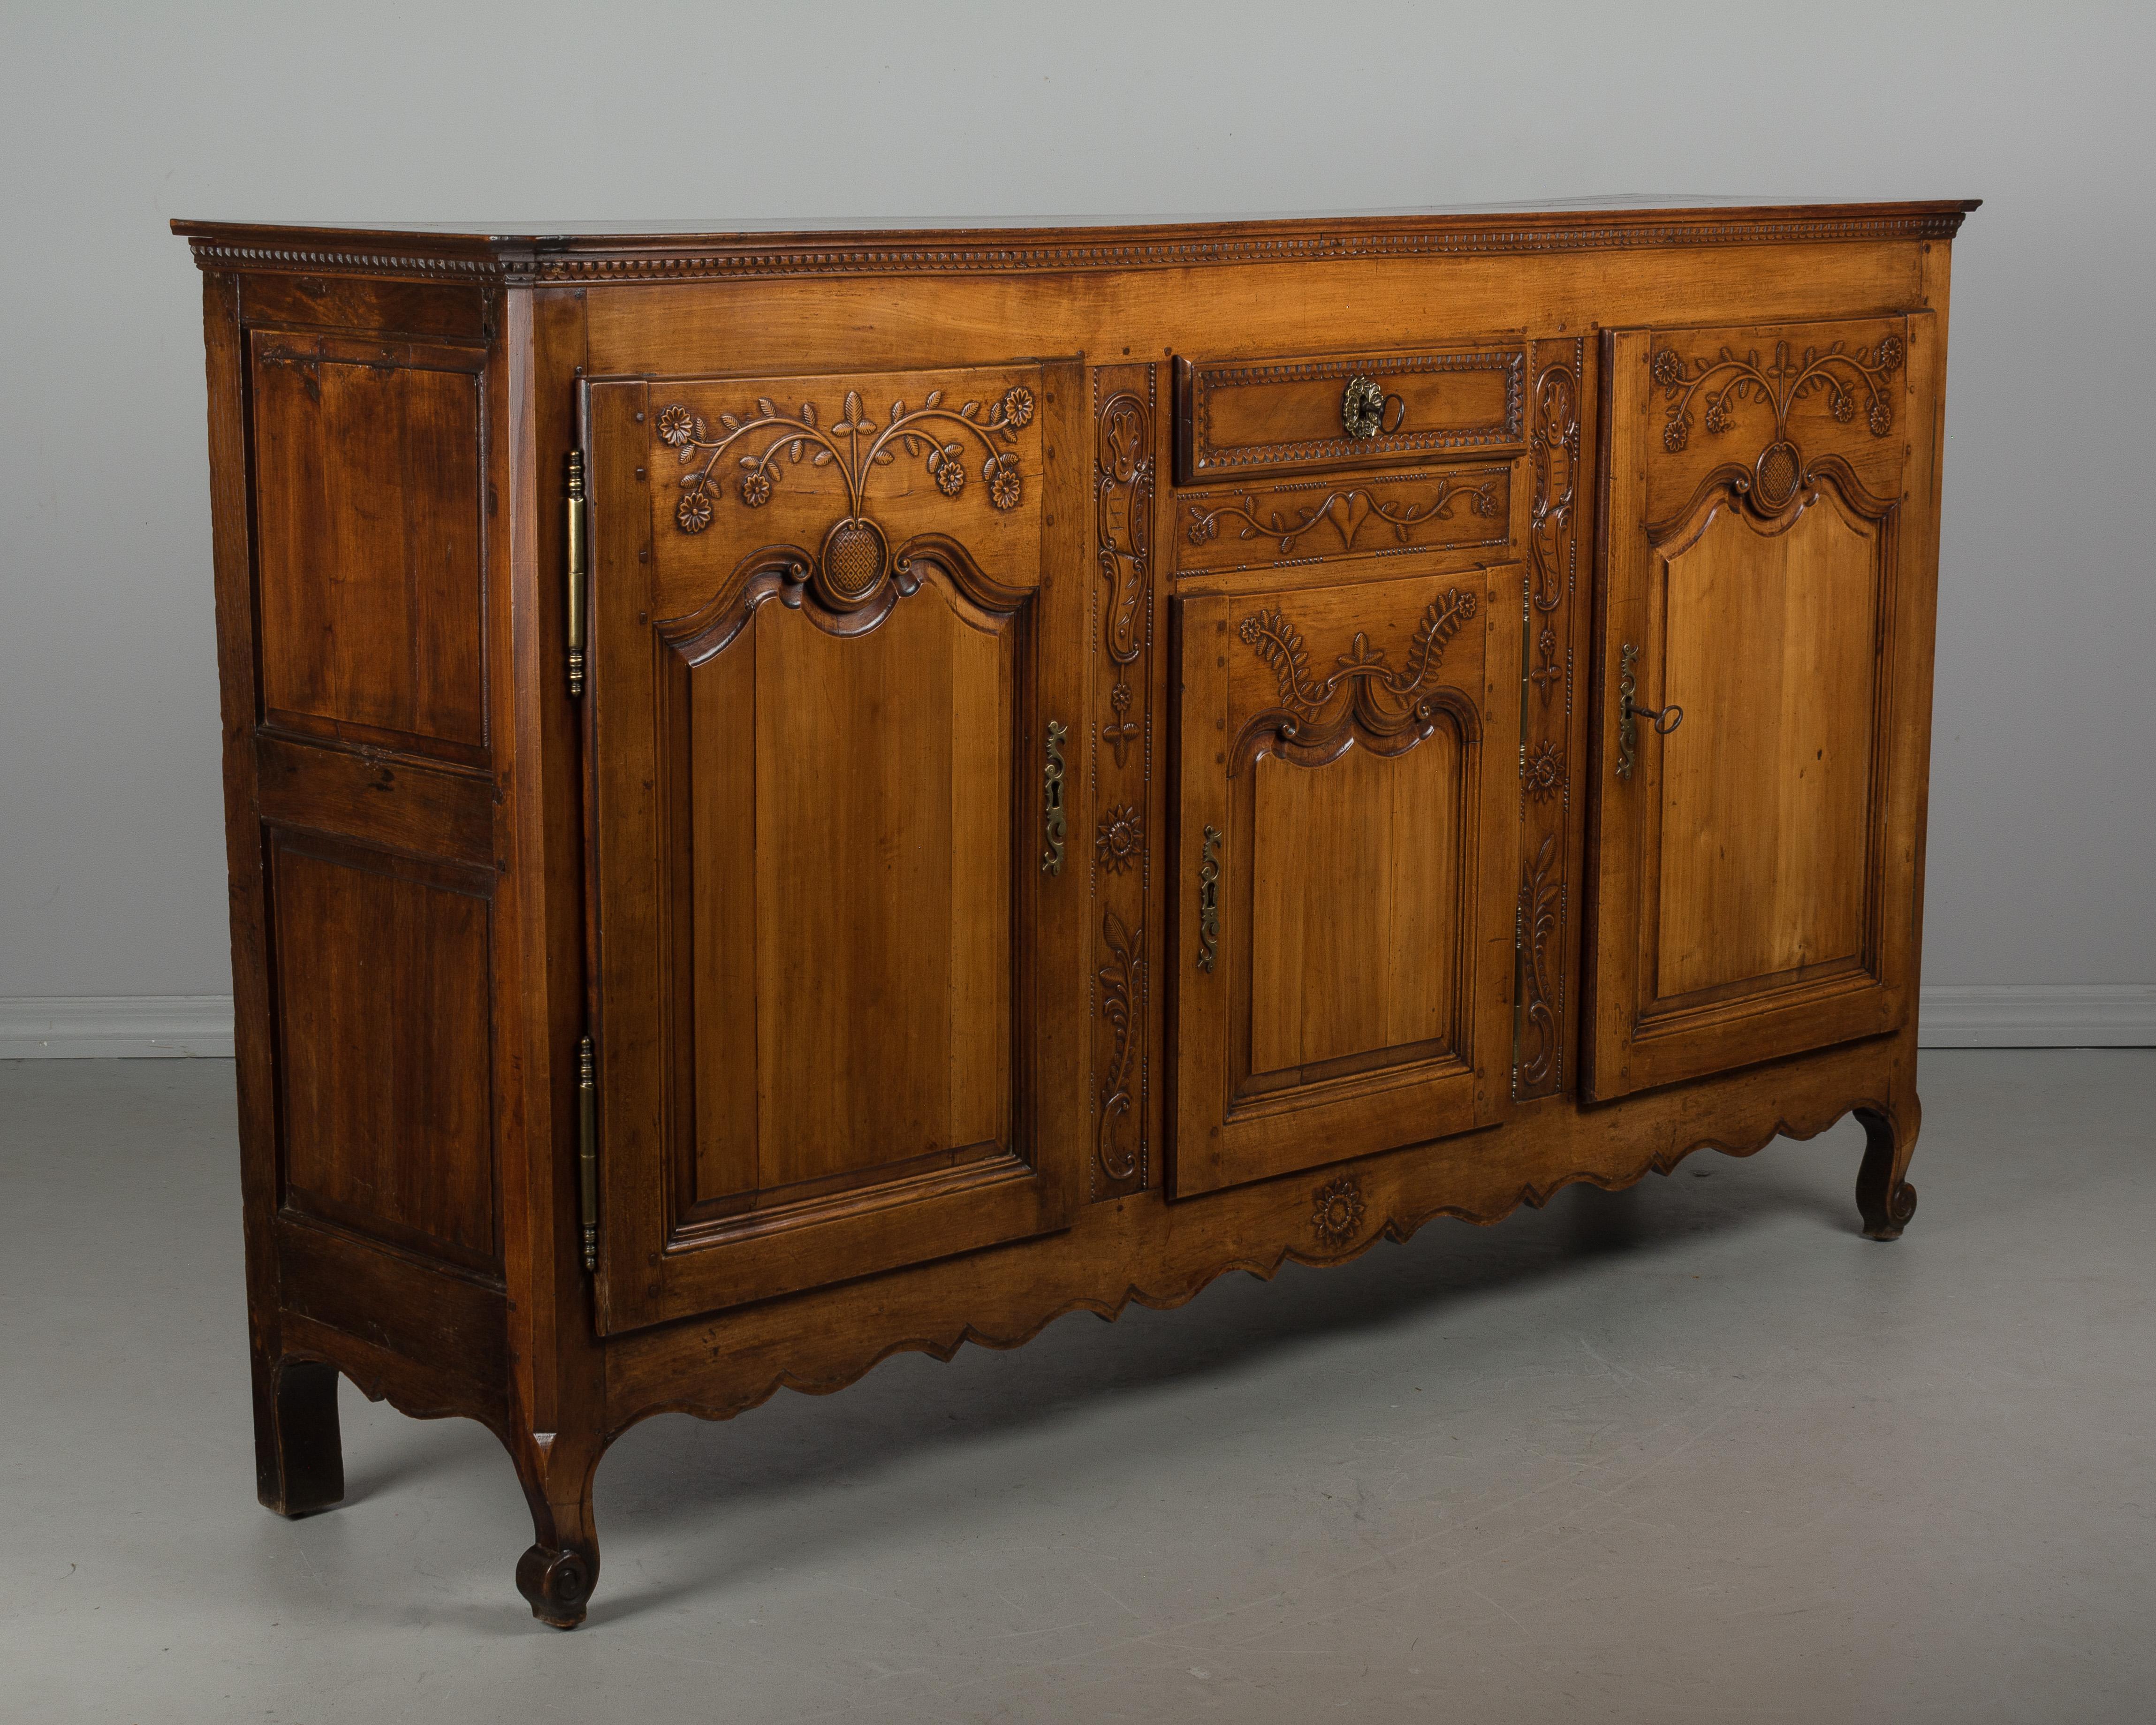 A late 18th century Country French enfilade or sideboard from Picardie (Northern France) made of solid cherry with waxed patina. Beautiful hand-carved details include flowering vines and sunflowers on the raised panel doors and decorative carved